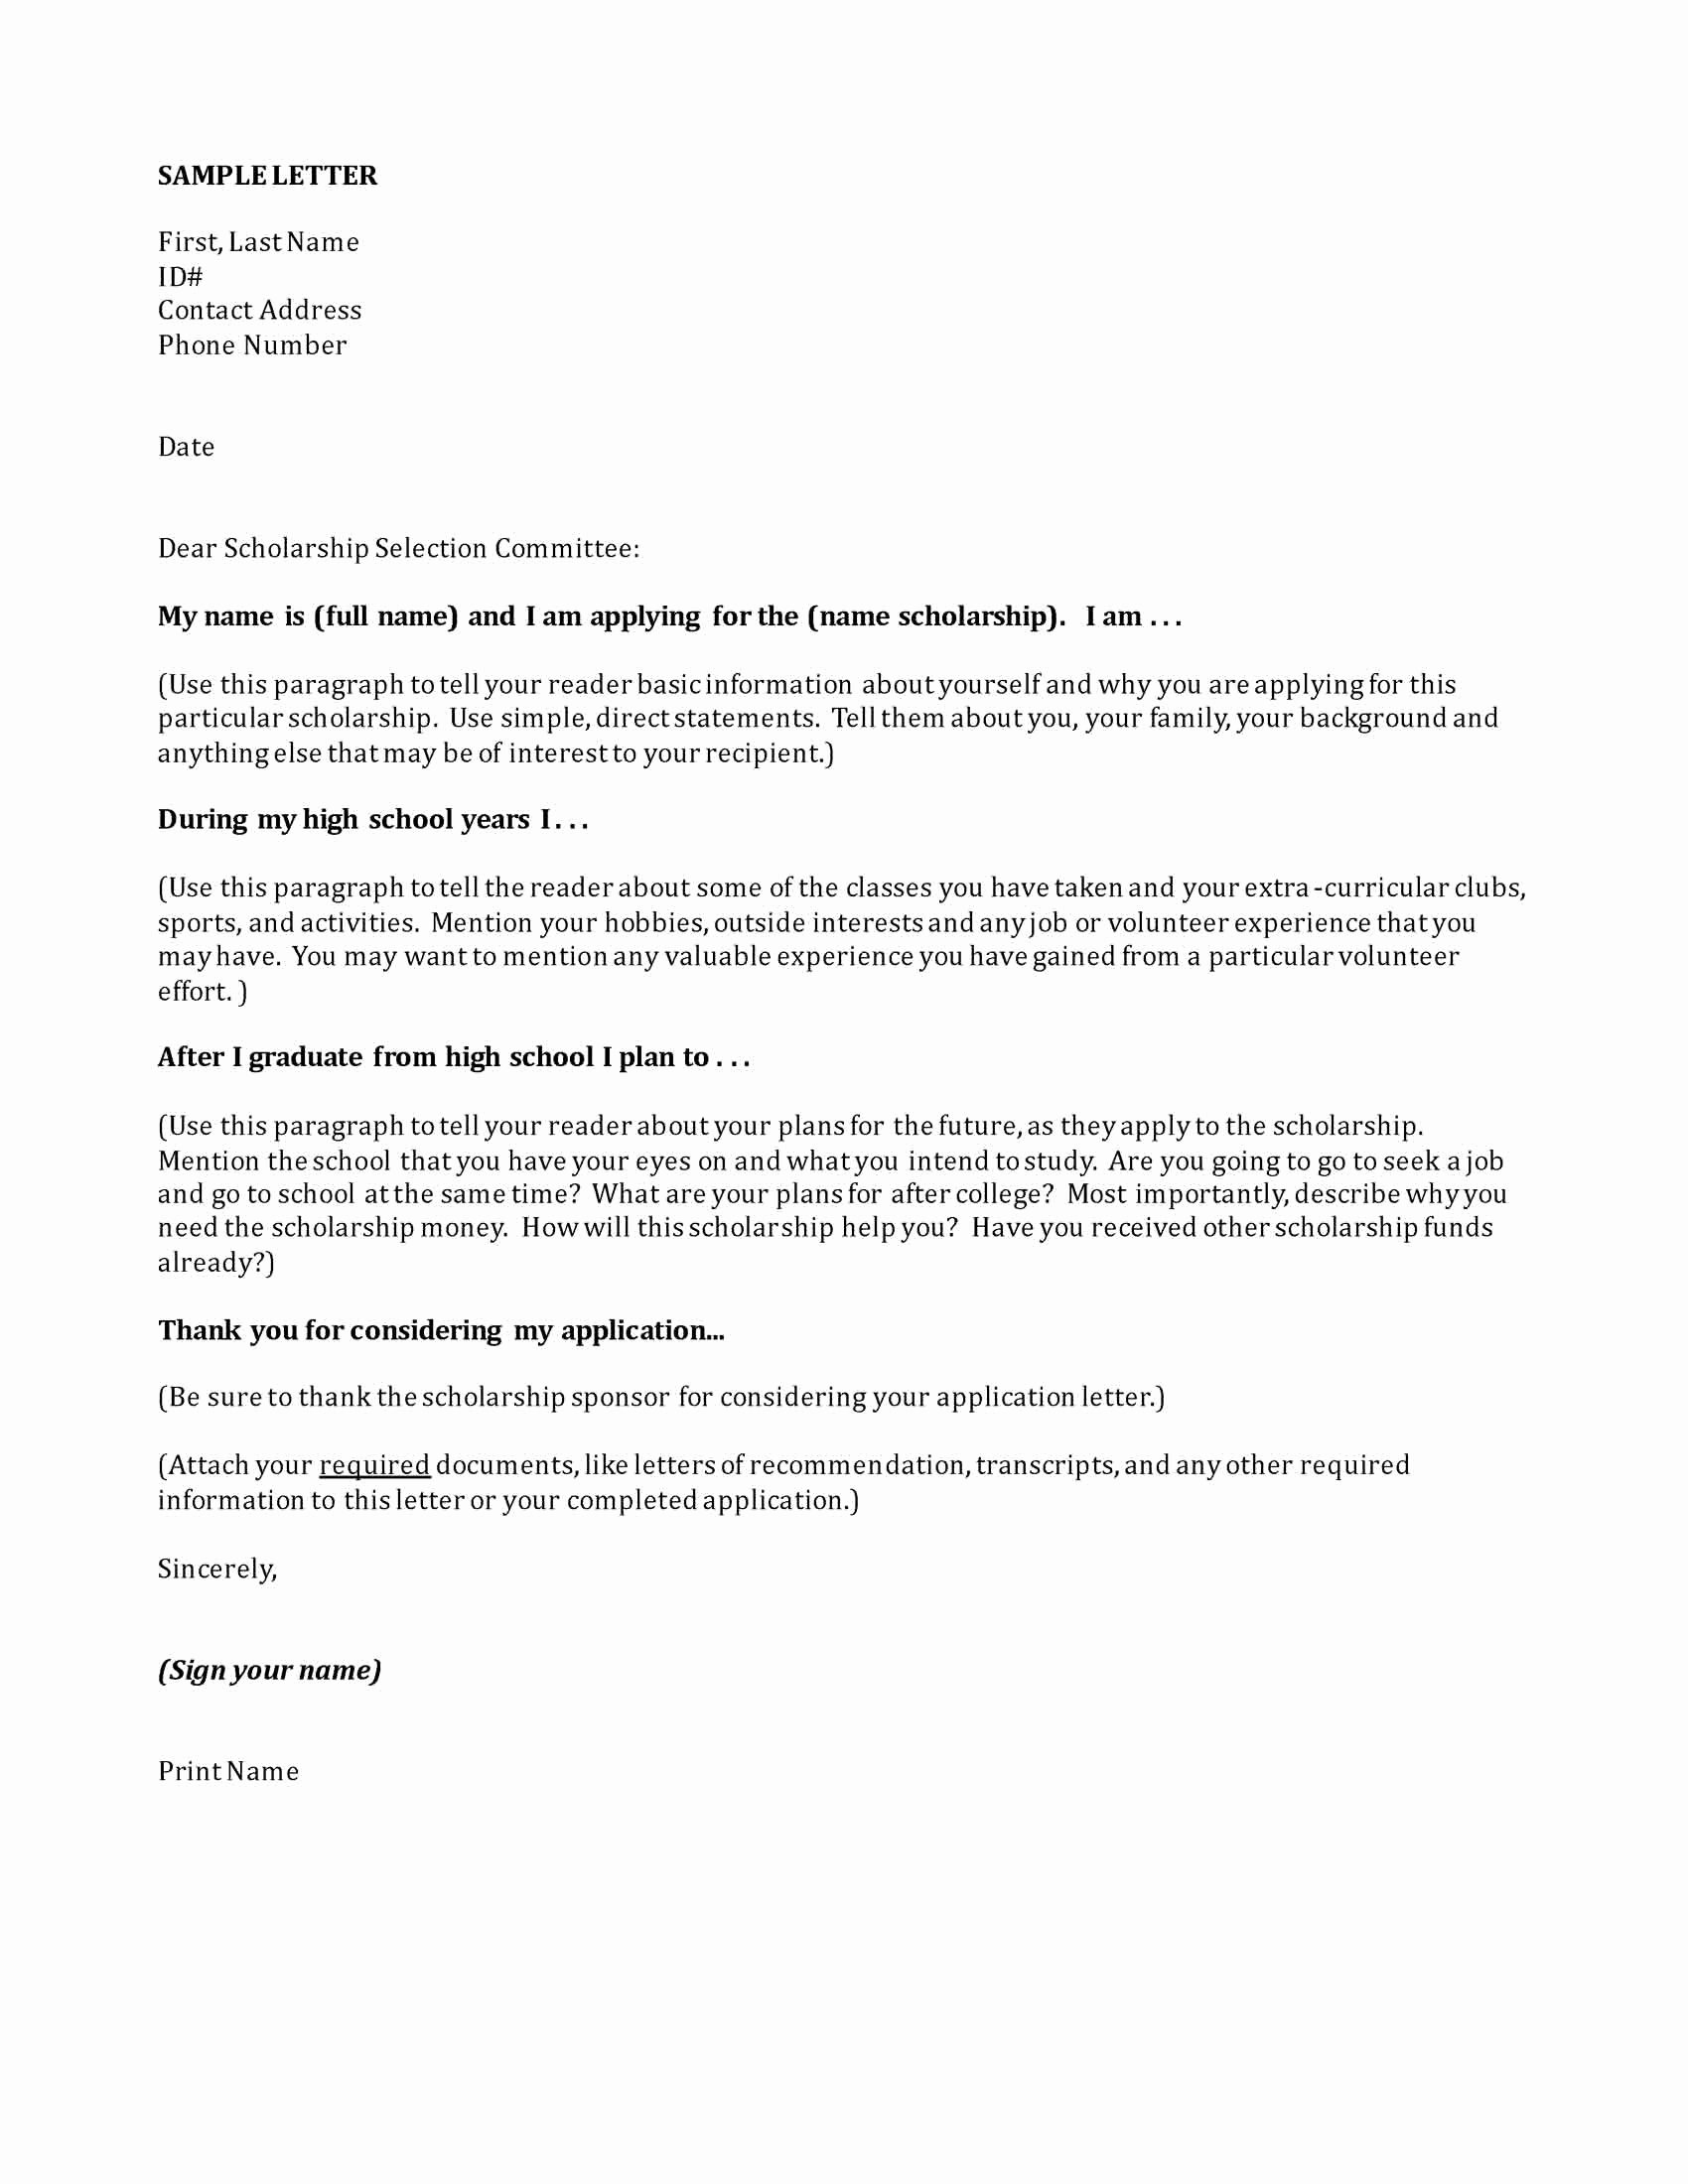 College Application Sample New Letter Application Letter Application Sample